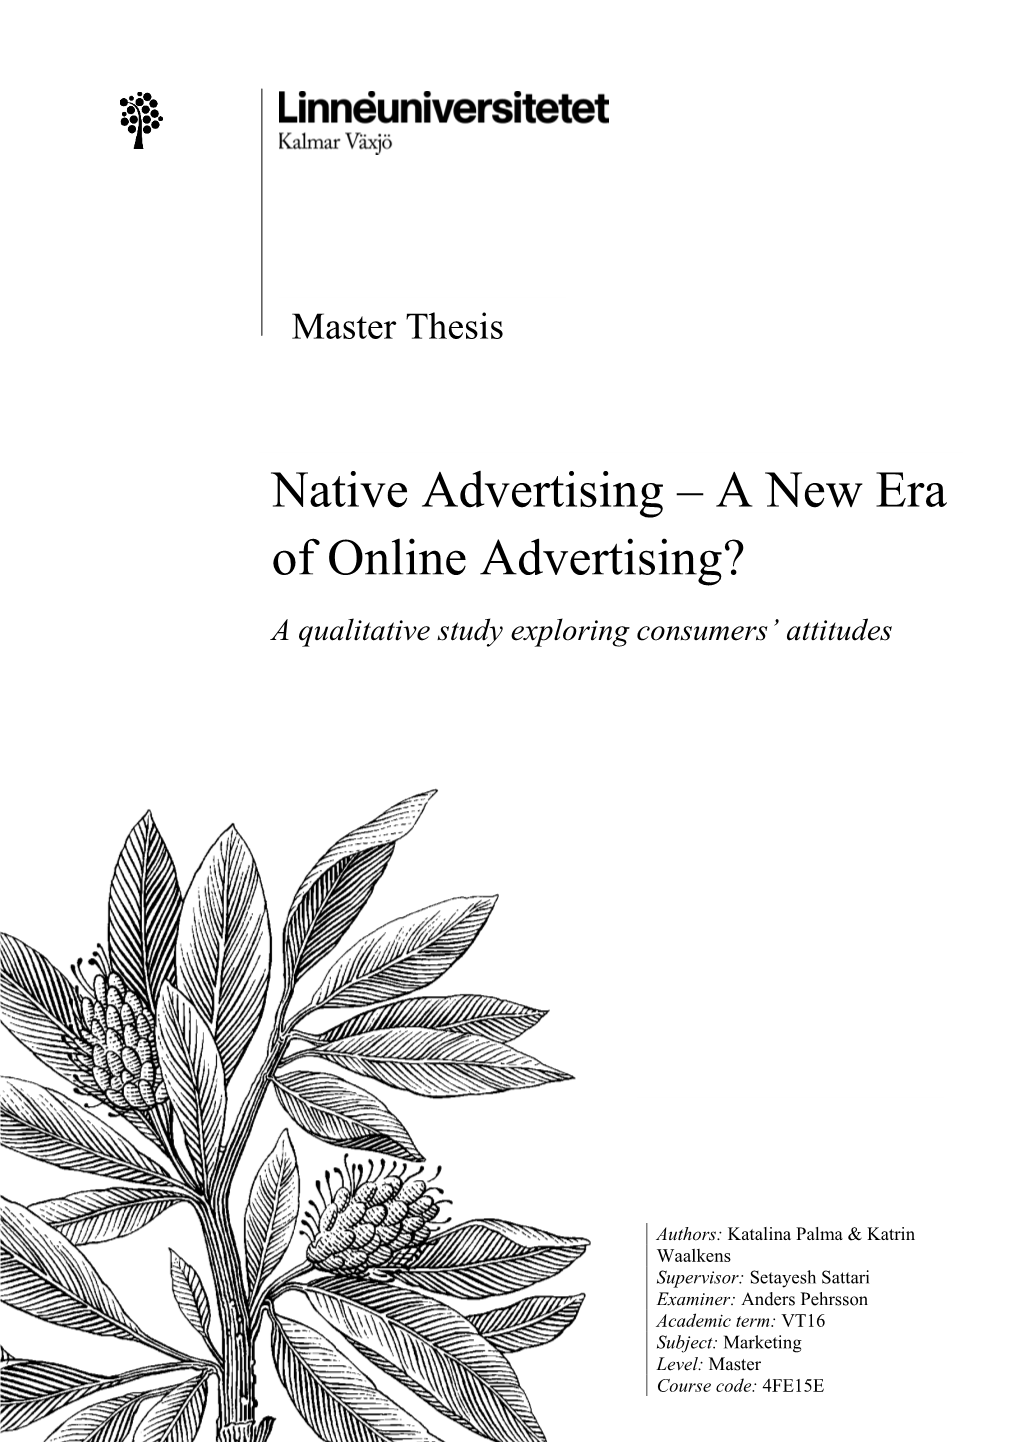 Native Advertising – a New Era of Online Advertising?